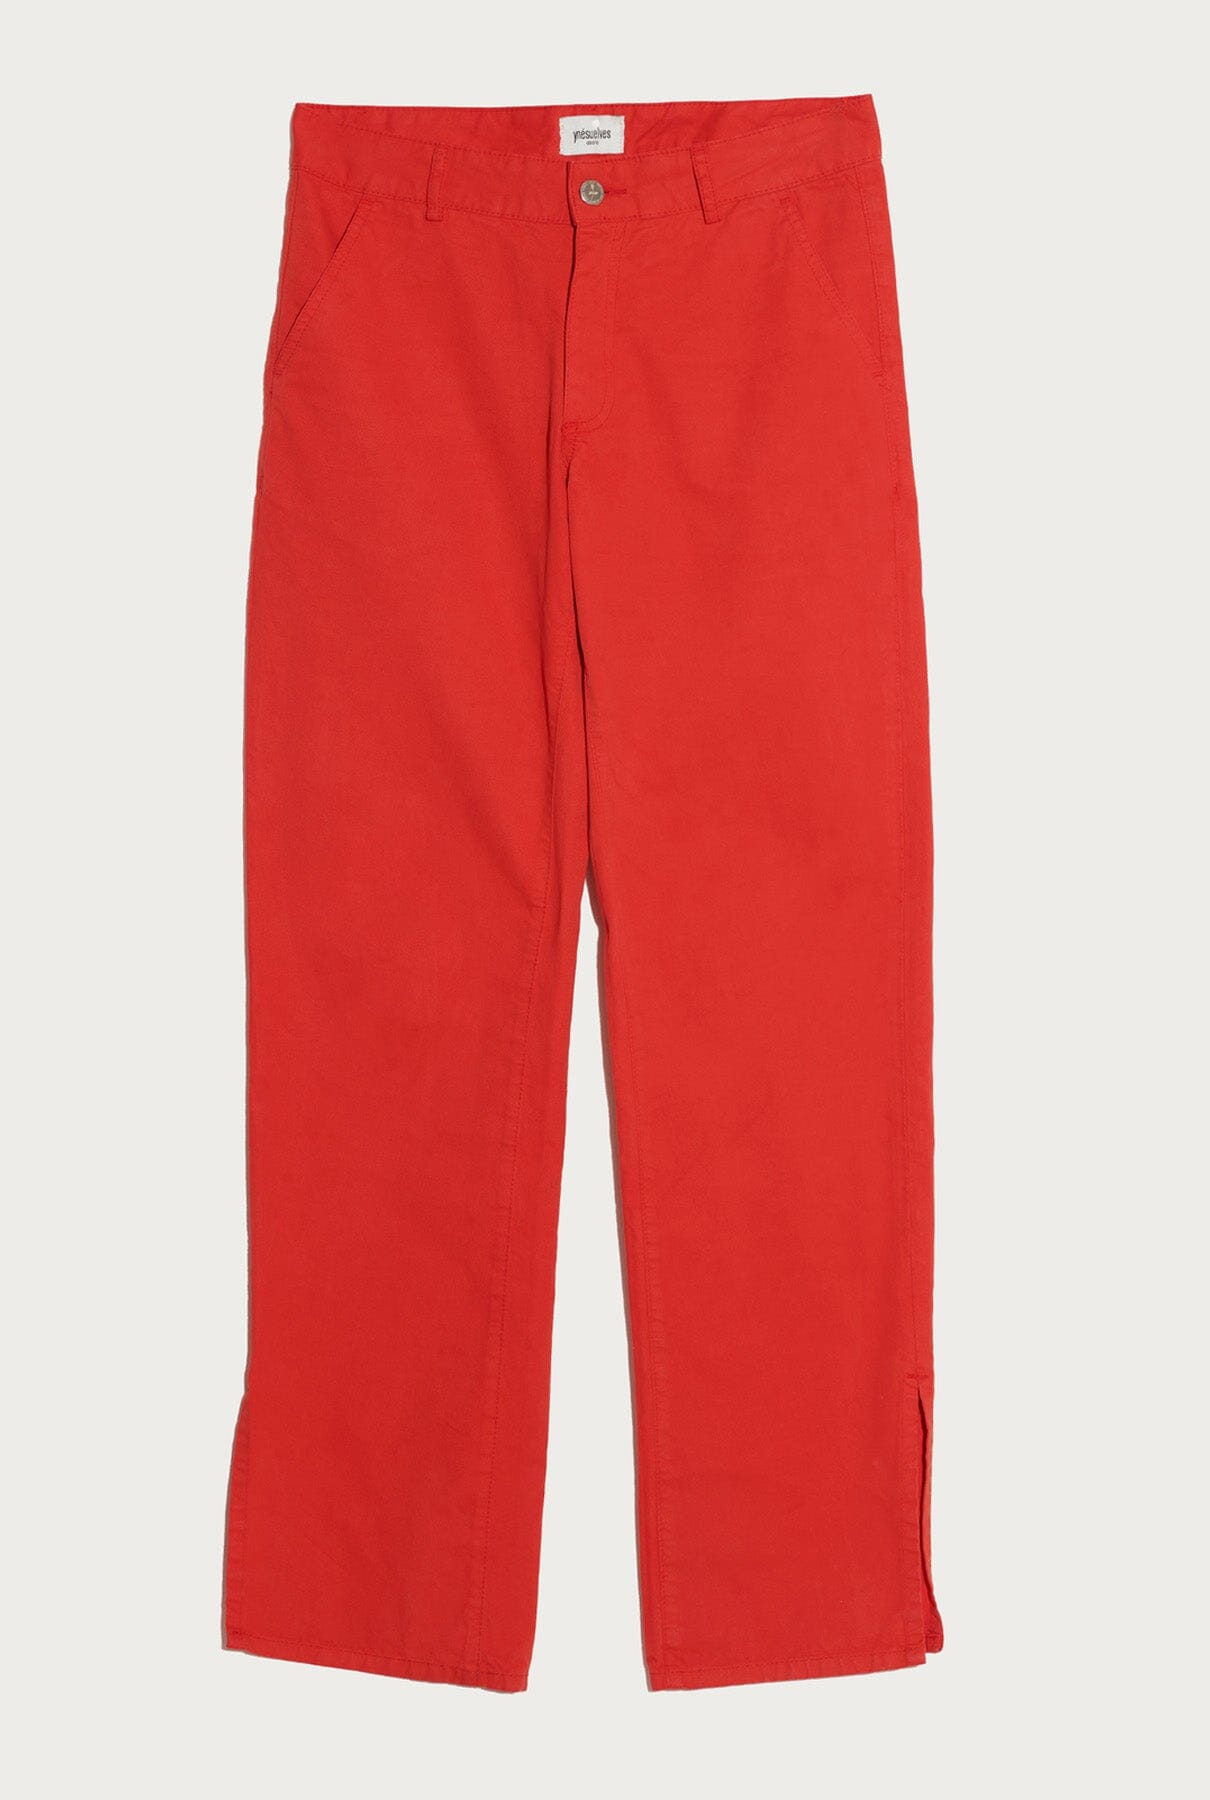 Red Pants Trousers Ynes Suelves 